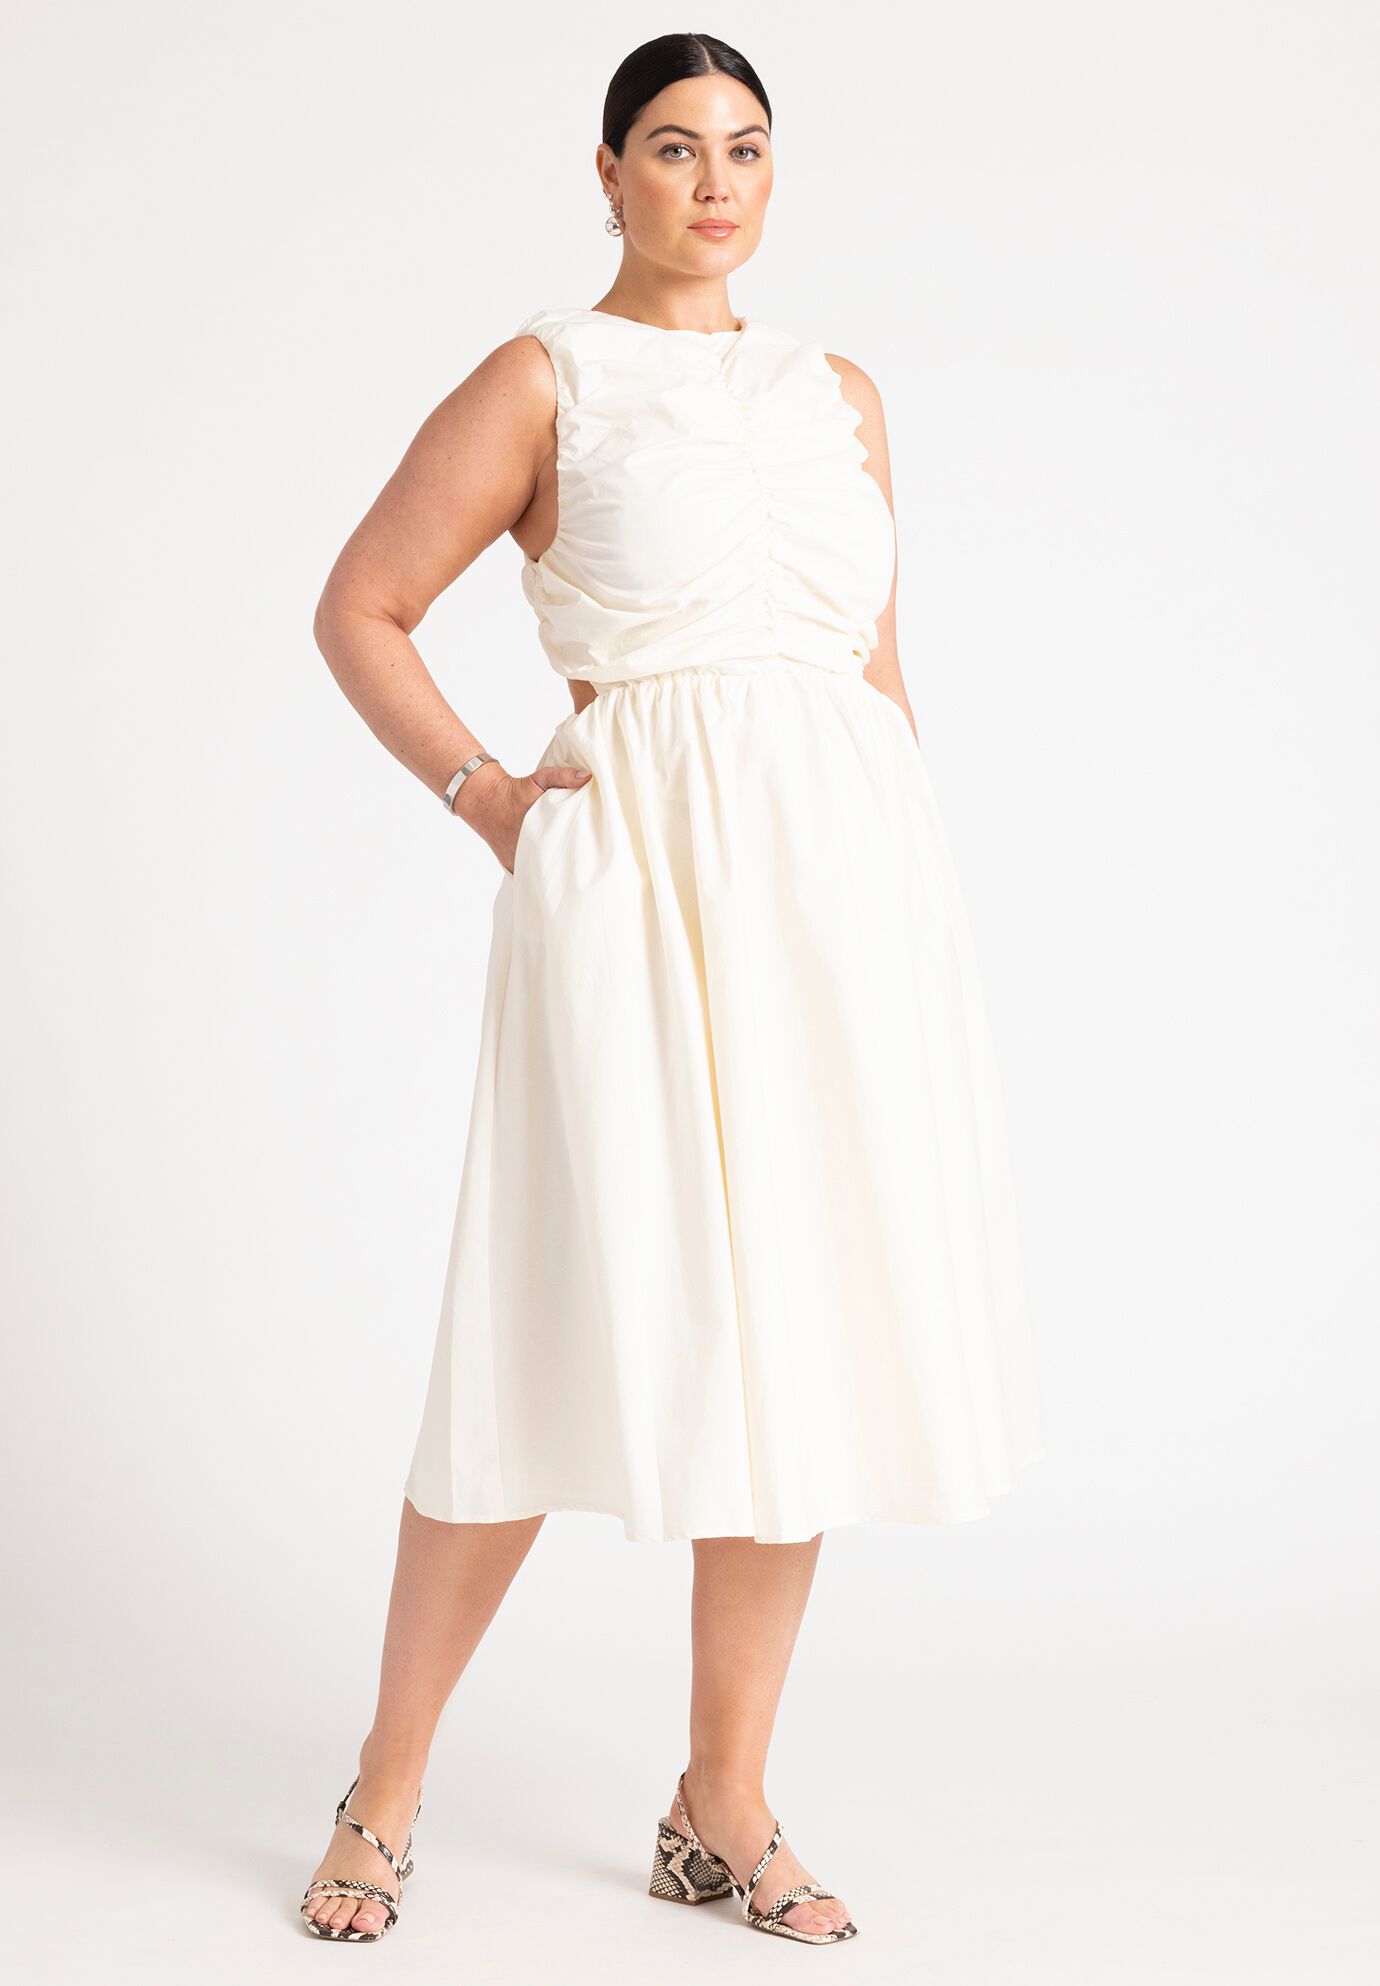 Shirred Pocketed Cutout Sleeveless Dress With Pearls by Eloquii